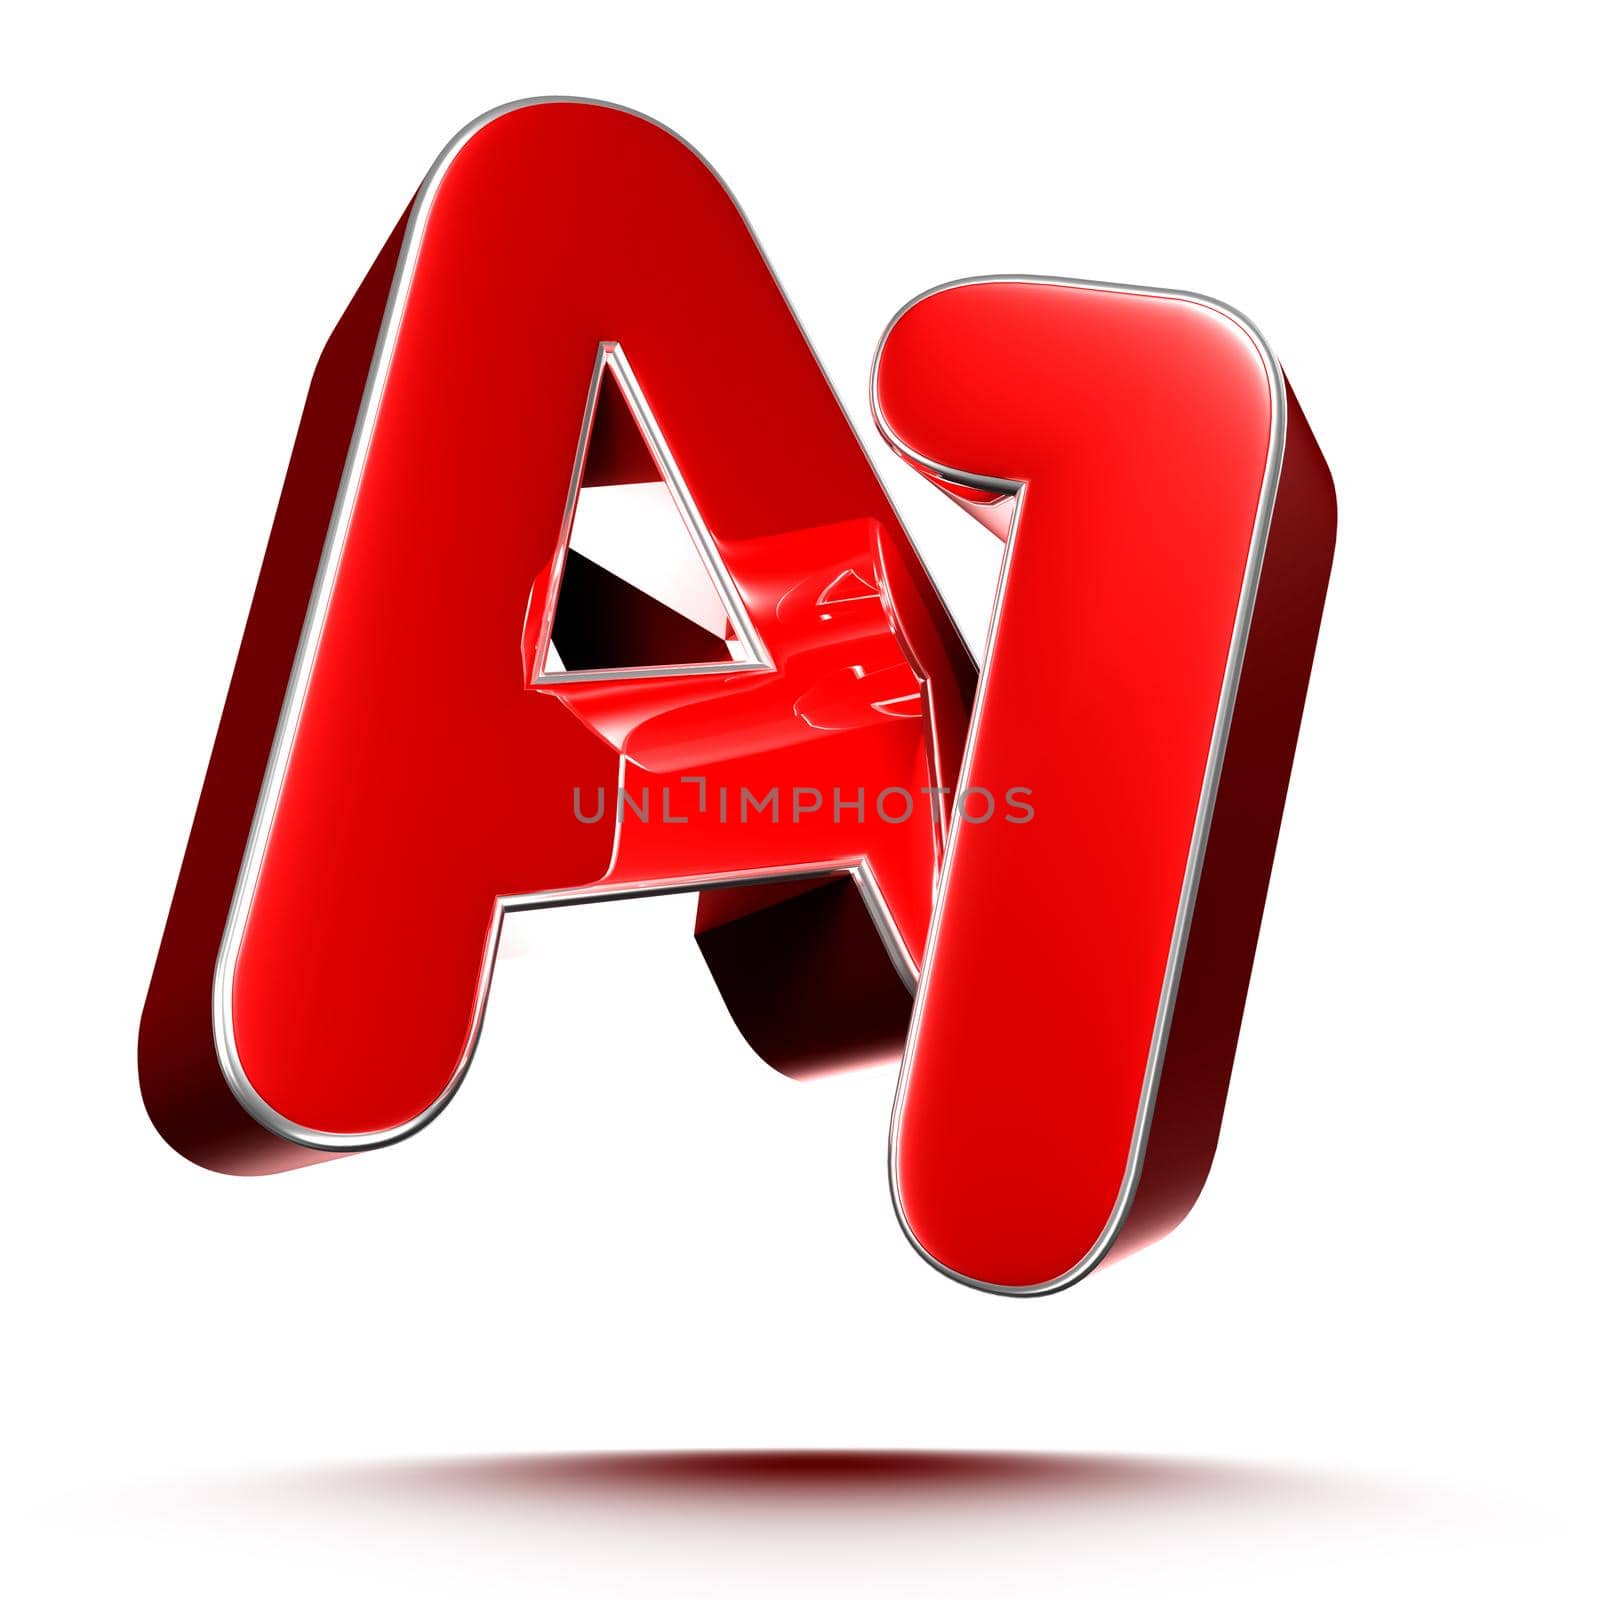 A1 red 3D illustration on white background with clipping path.